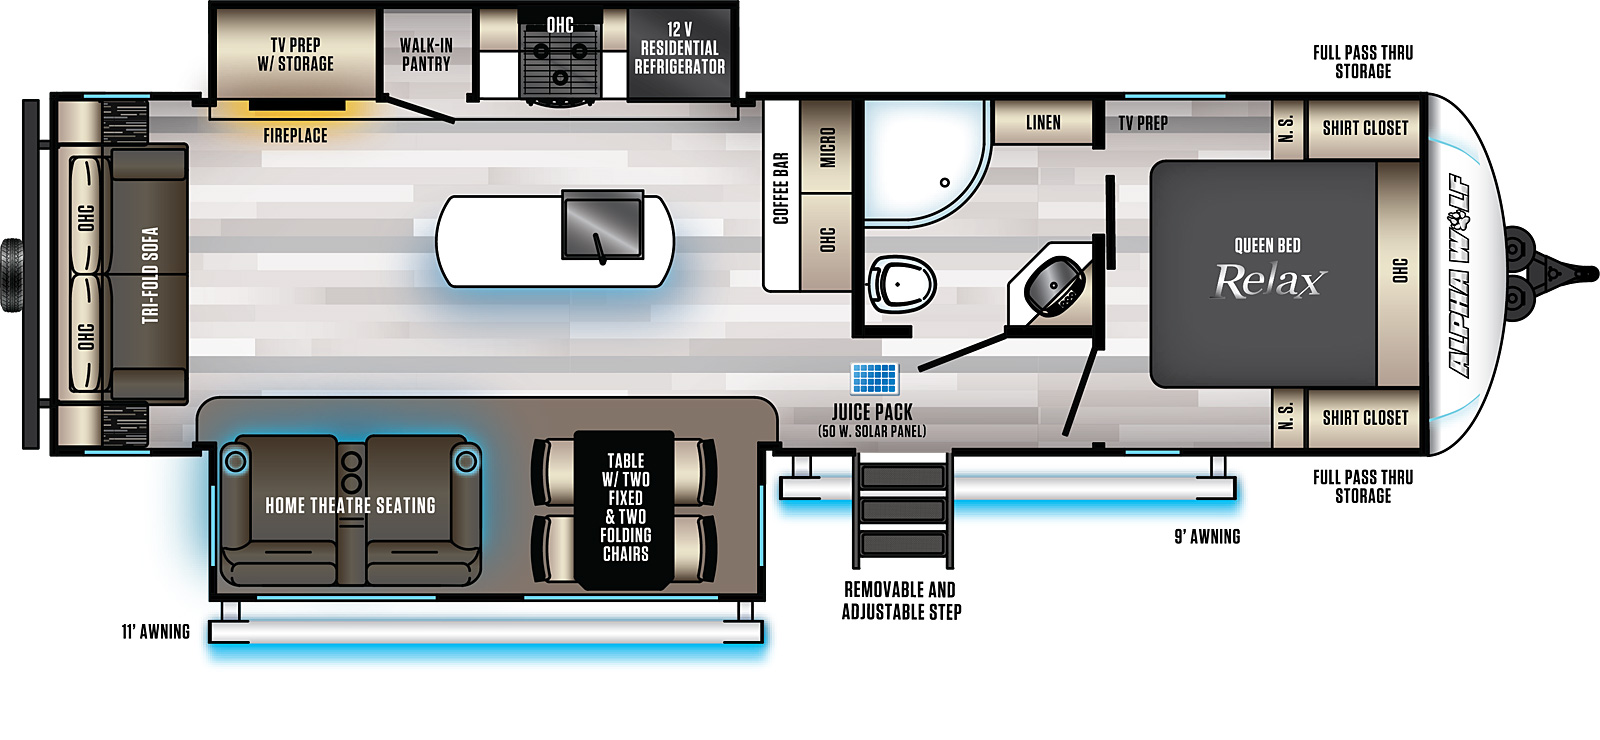 The 26RL-L has two slide outs, one on the off-door side and one on the door side along with one entry door. There is an 11 foot awning on the door side slide out along with a 9 foot awning on the door side over the entry door. There is a full pass through storage at the front of the travel trailer. Interior layout from front to back: front bedroom with foot facing queen bed; side aisle pass-through bathroom; kitchen with kitchen island; door side slide out with home theater seating and table with two fixed and two folding chairs; off-door side slide out with TV prep and storage, walk-in pantry stove top and 12 Volt residential refrigerator; tri-fold sofa on rear wall.